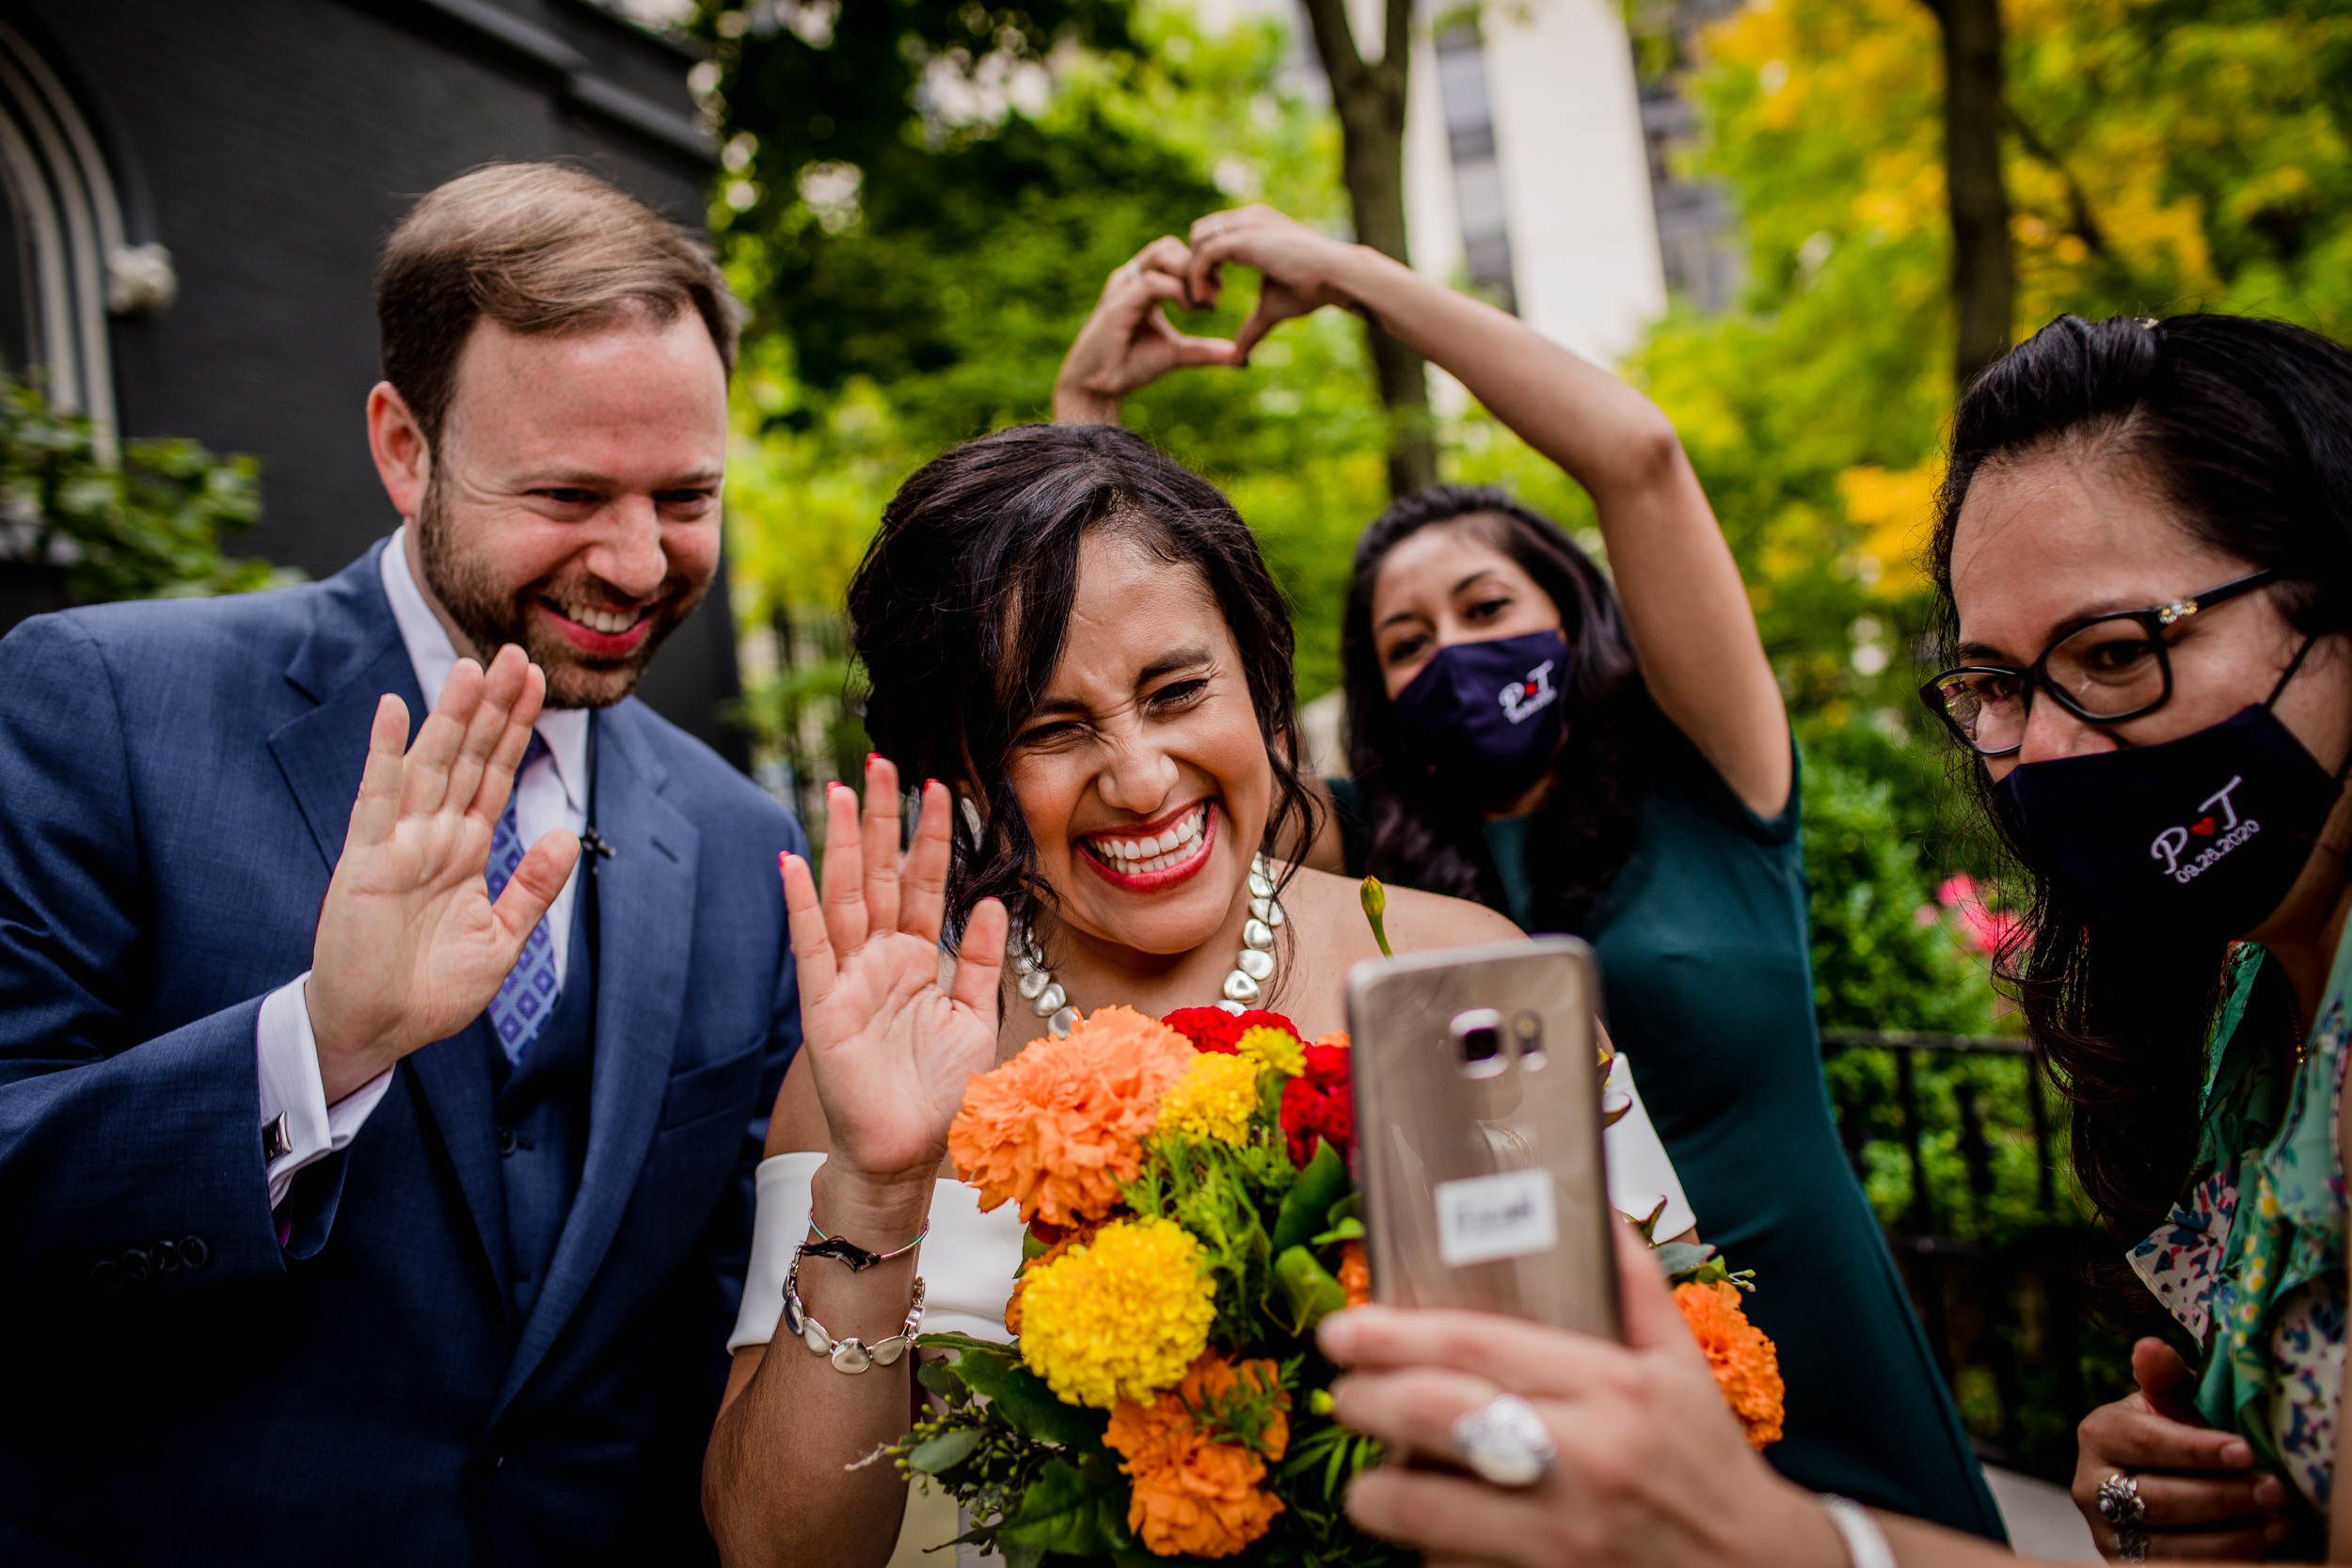 Guests greet family on an phone call during a Church of the Ascension garden wedding ceremony in downtown Chicago.